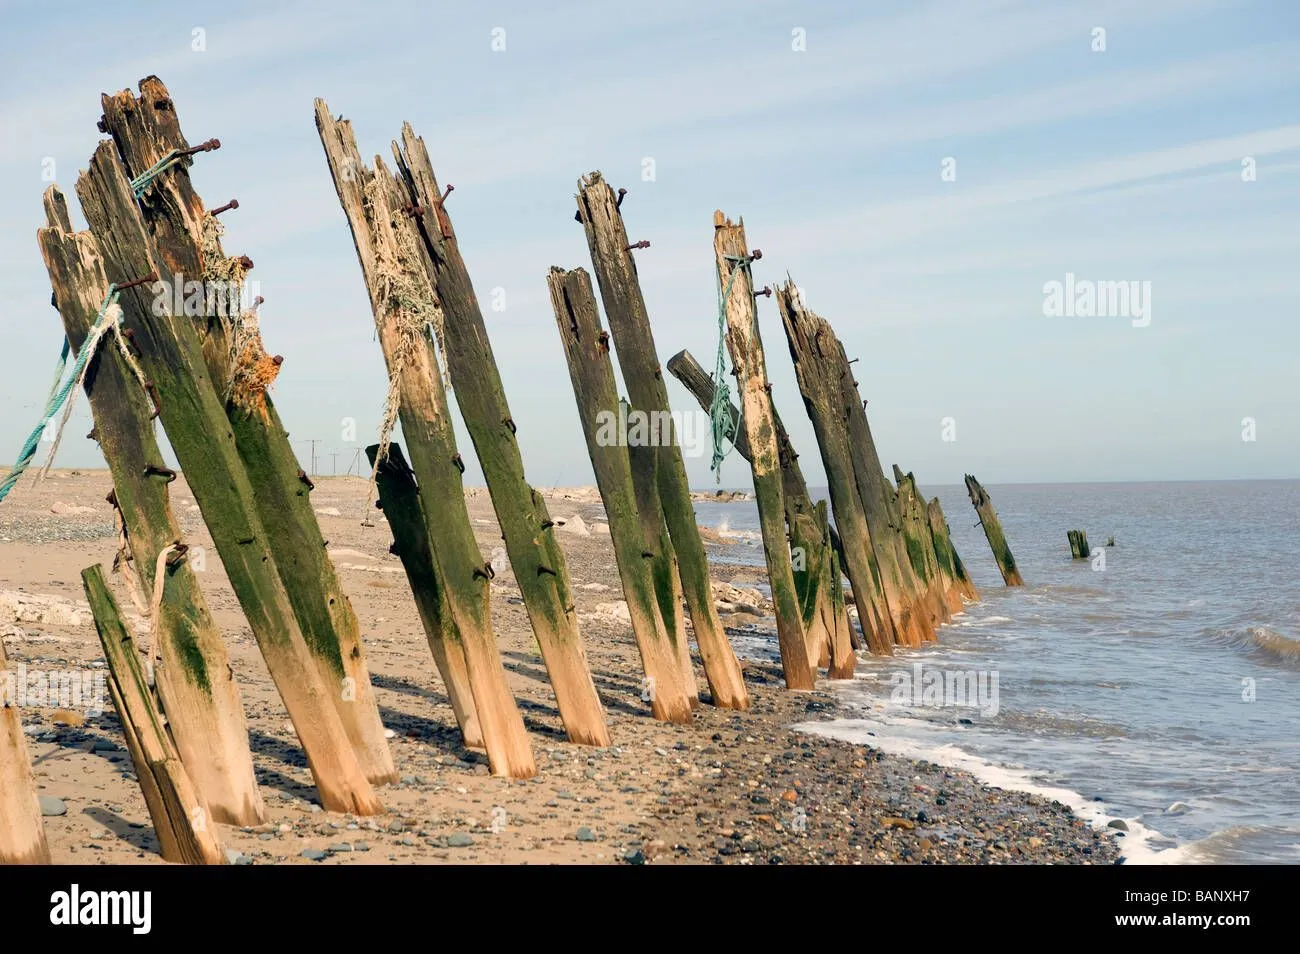 Spurn Point, Remains Of An Old Sea Defence System With Rusty Nails ...